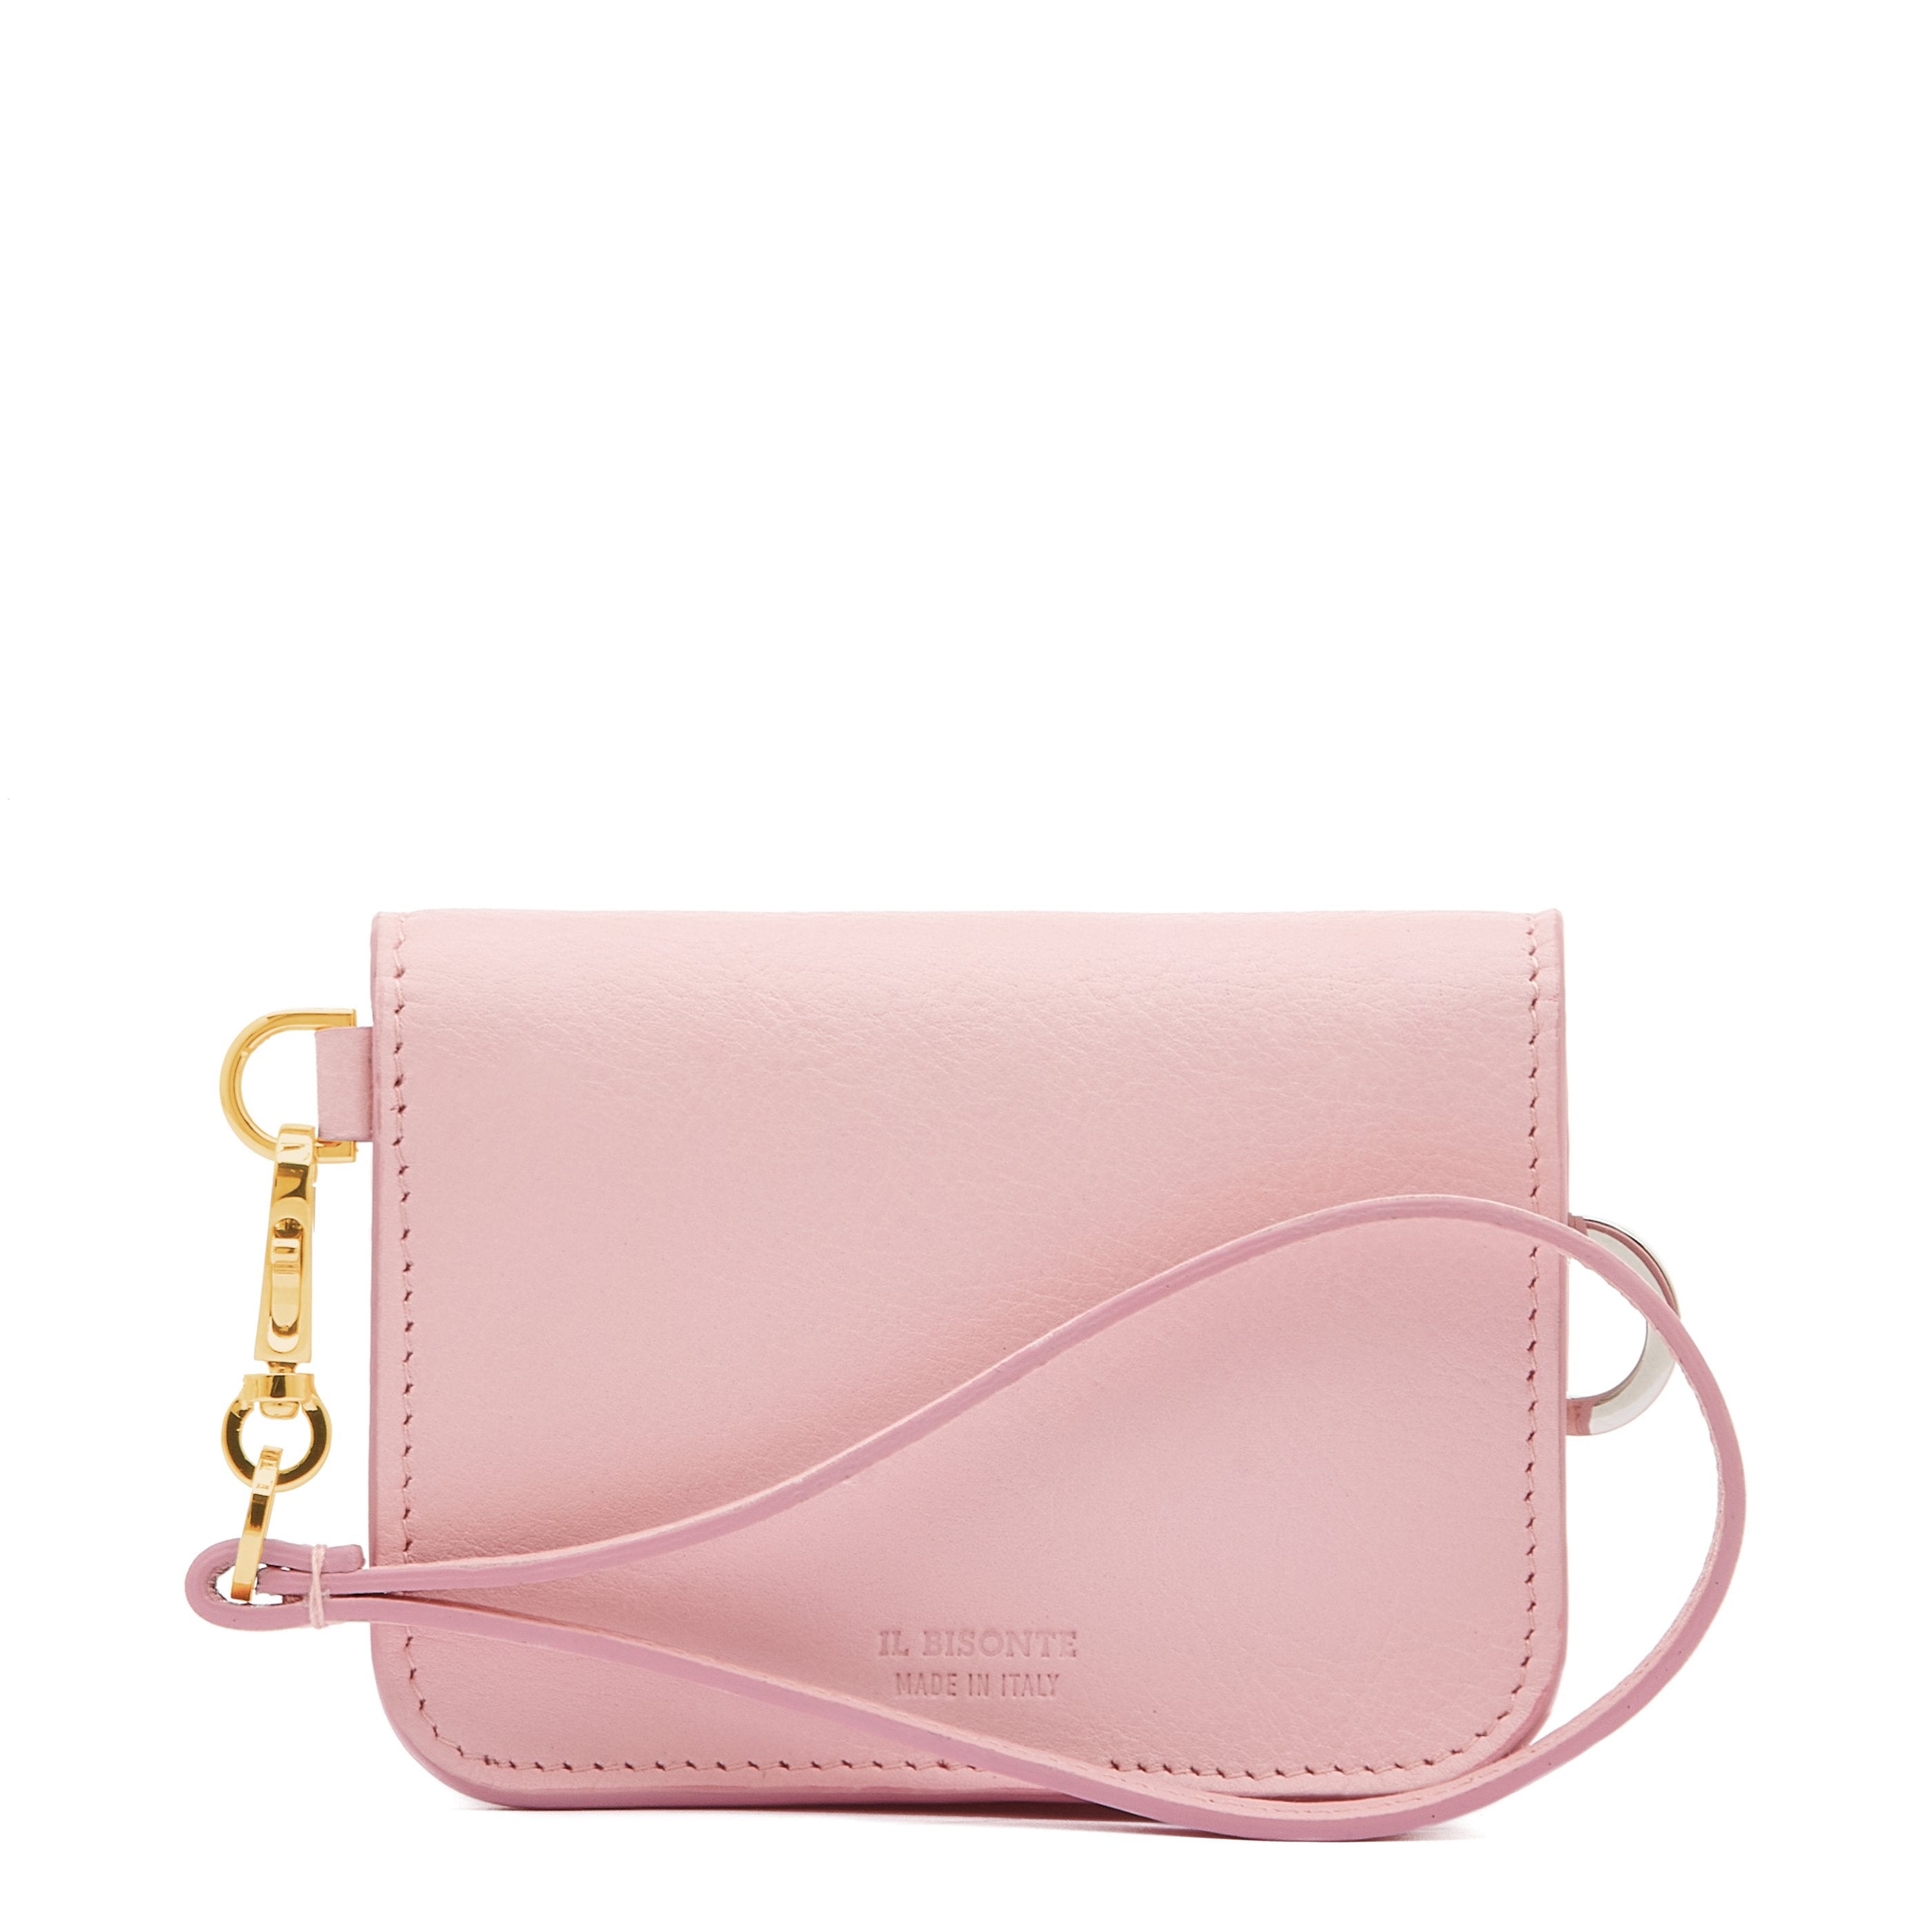 Slg ss22  Women's small wallet in leather color pale pink – Il Bisonte